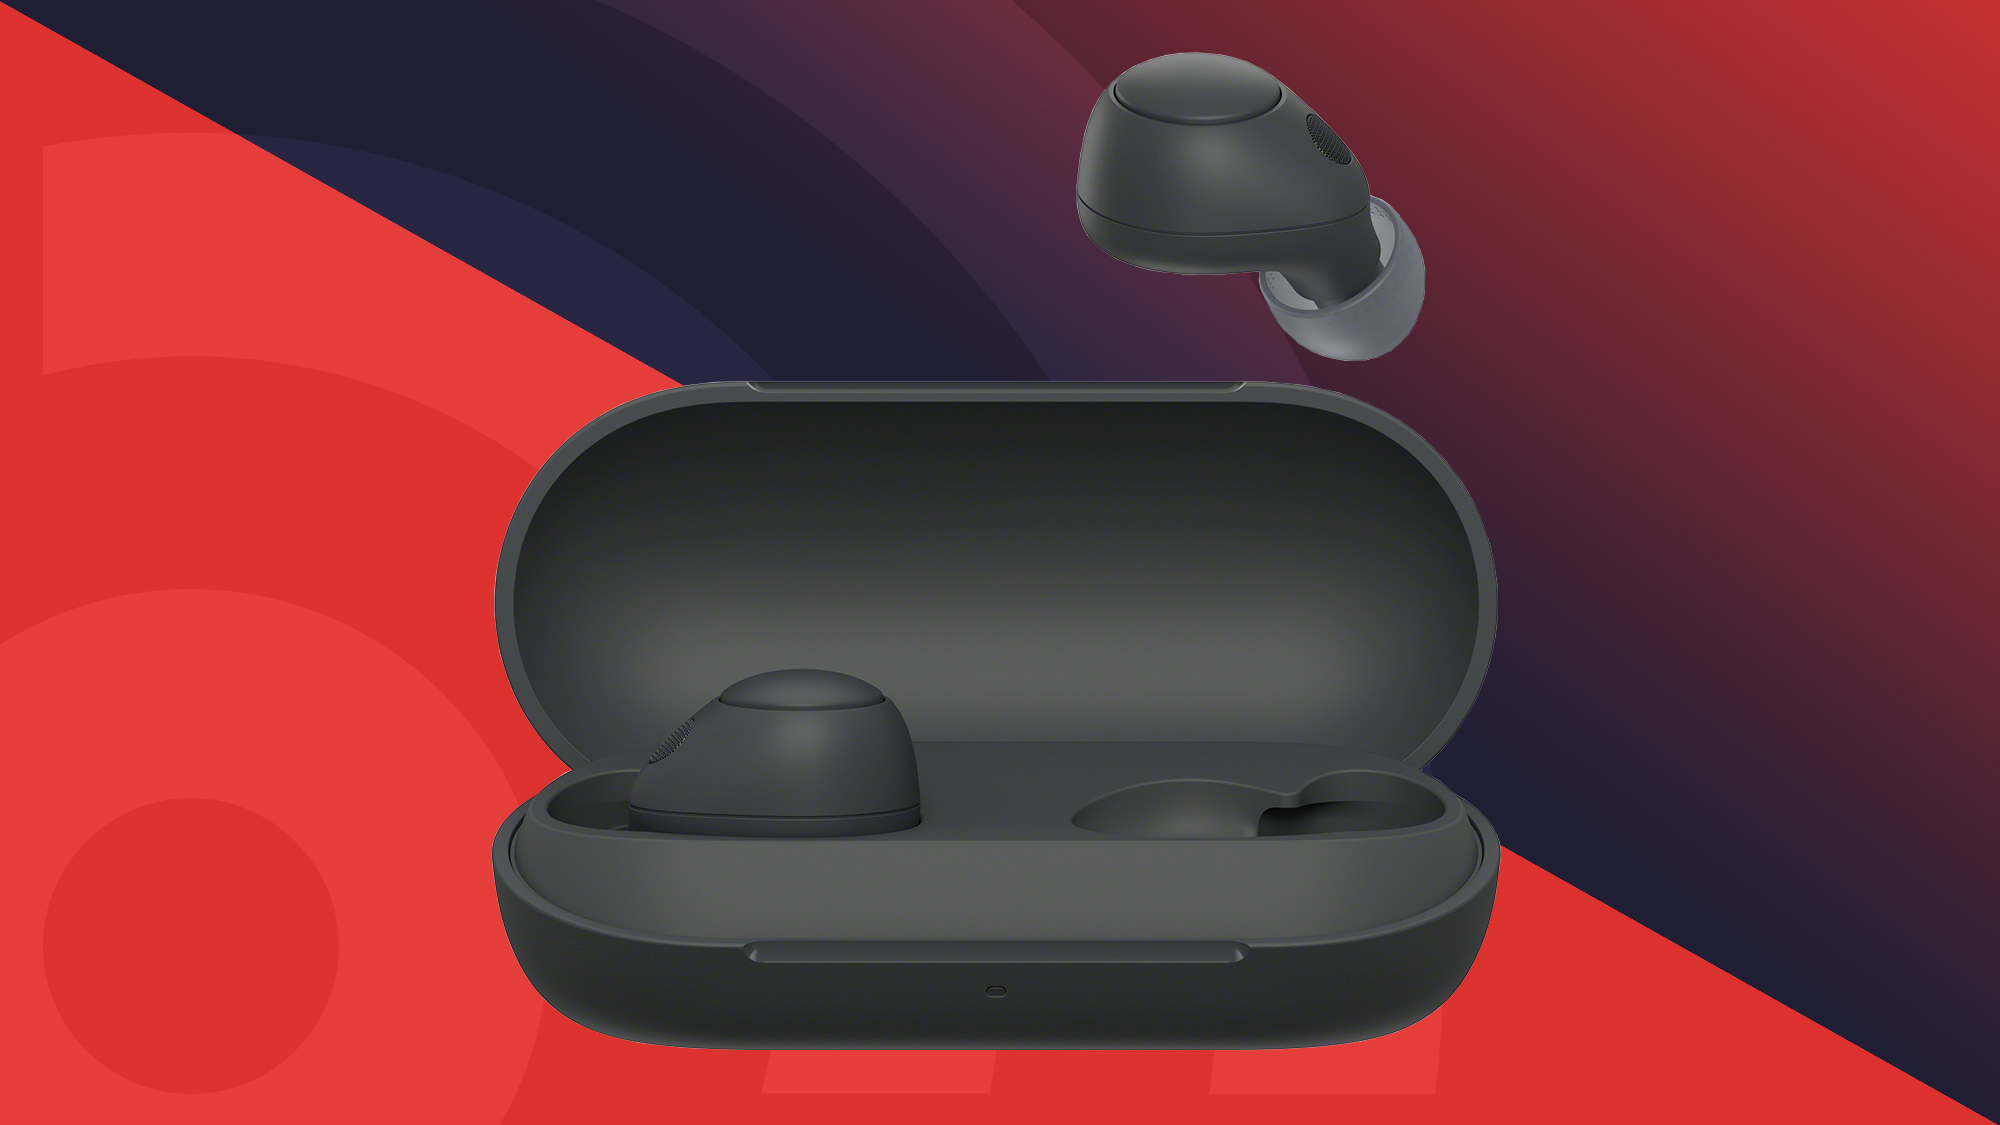 What are the Best Wireless Earbuds? Read this Before Buying - soundcore US